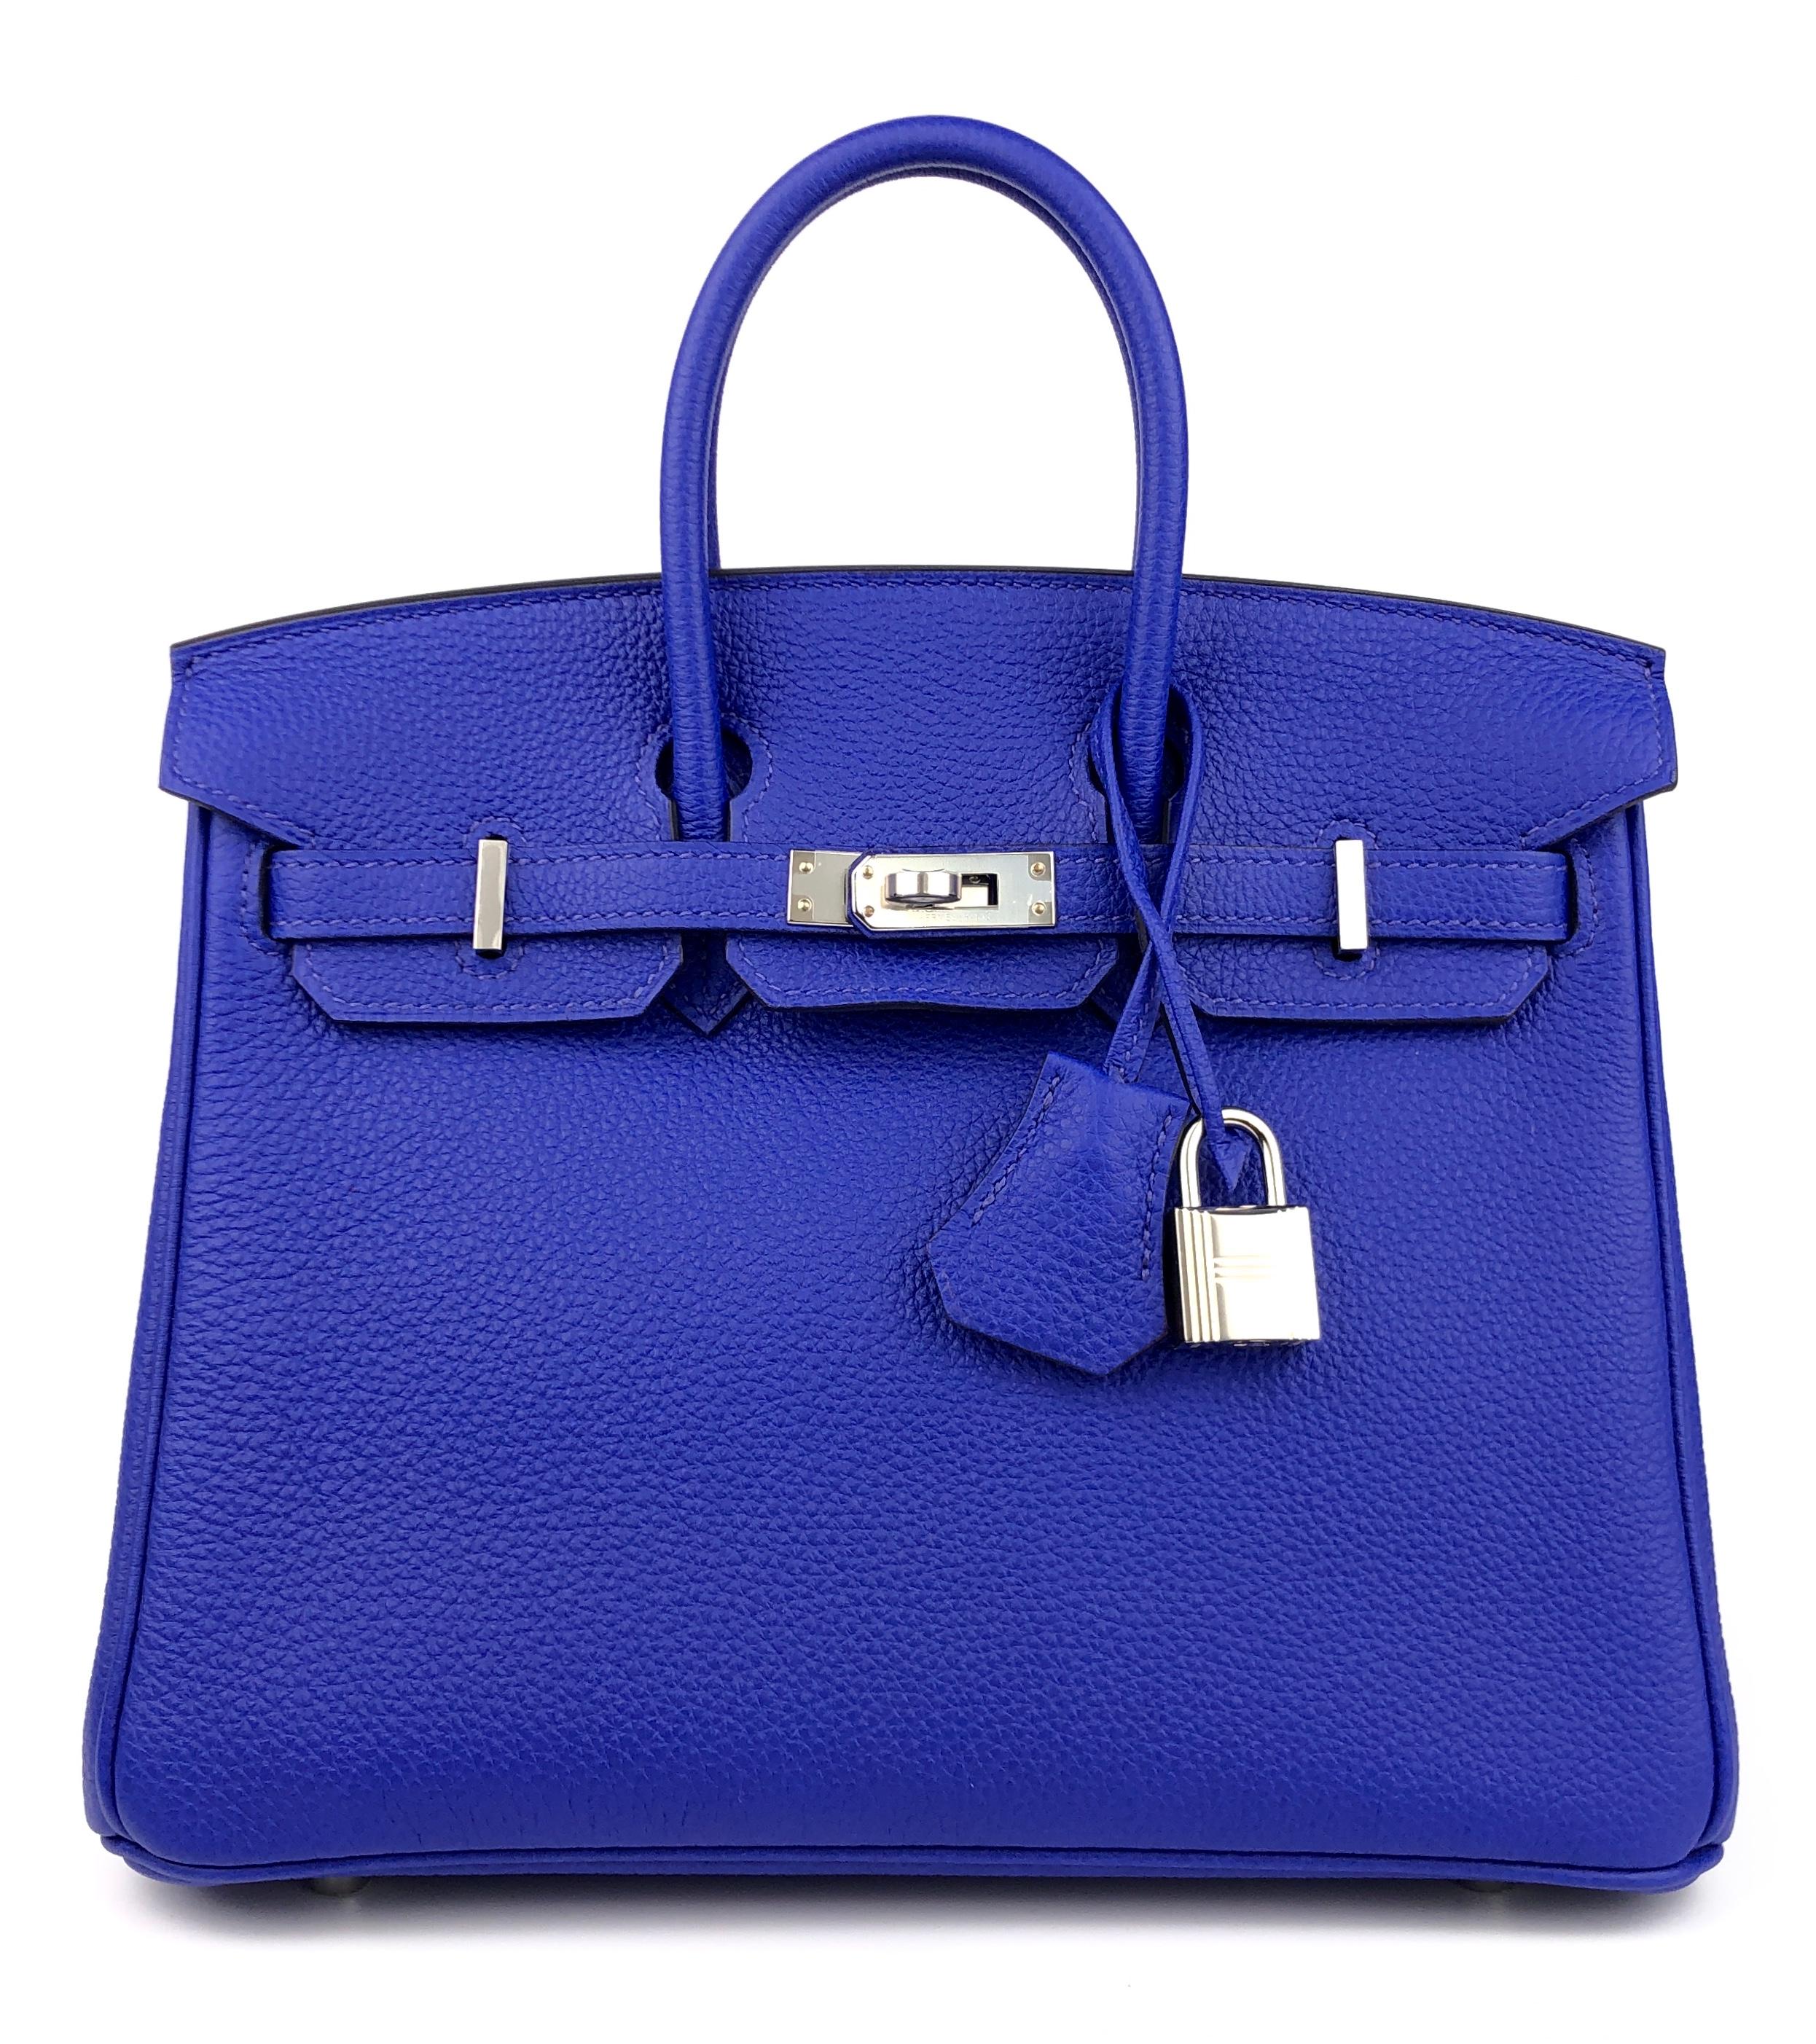 Absolutely Stunning As New 2020 Hermes Birkin 25 Verso Bleu Royal & Capucine Interior Togo Leather complimented by Palladium Hardware. As New Plastic on all Hardware and Feet. Y Stamp 2020. 

Shop with Confidence from Lux Addicts. Authenticity